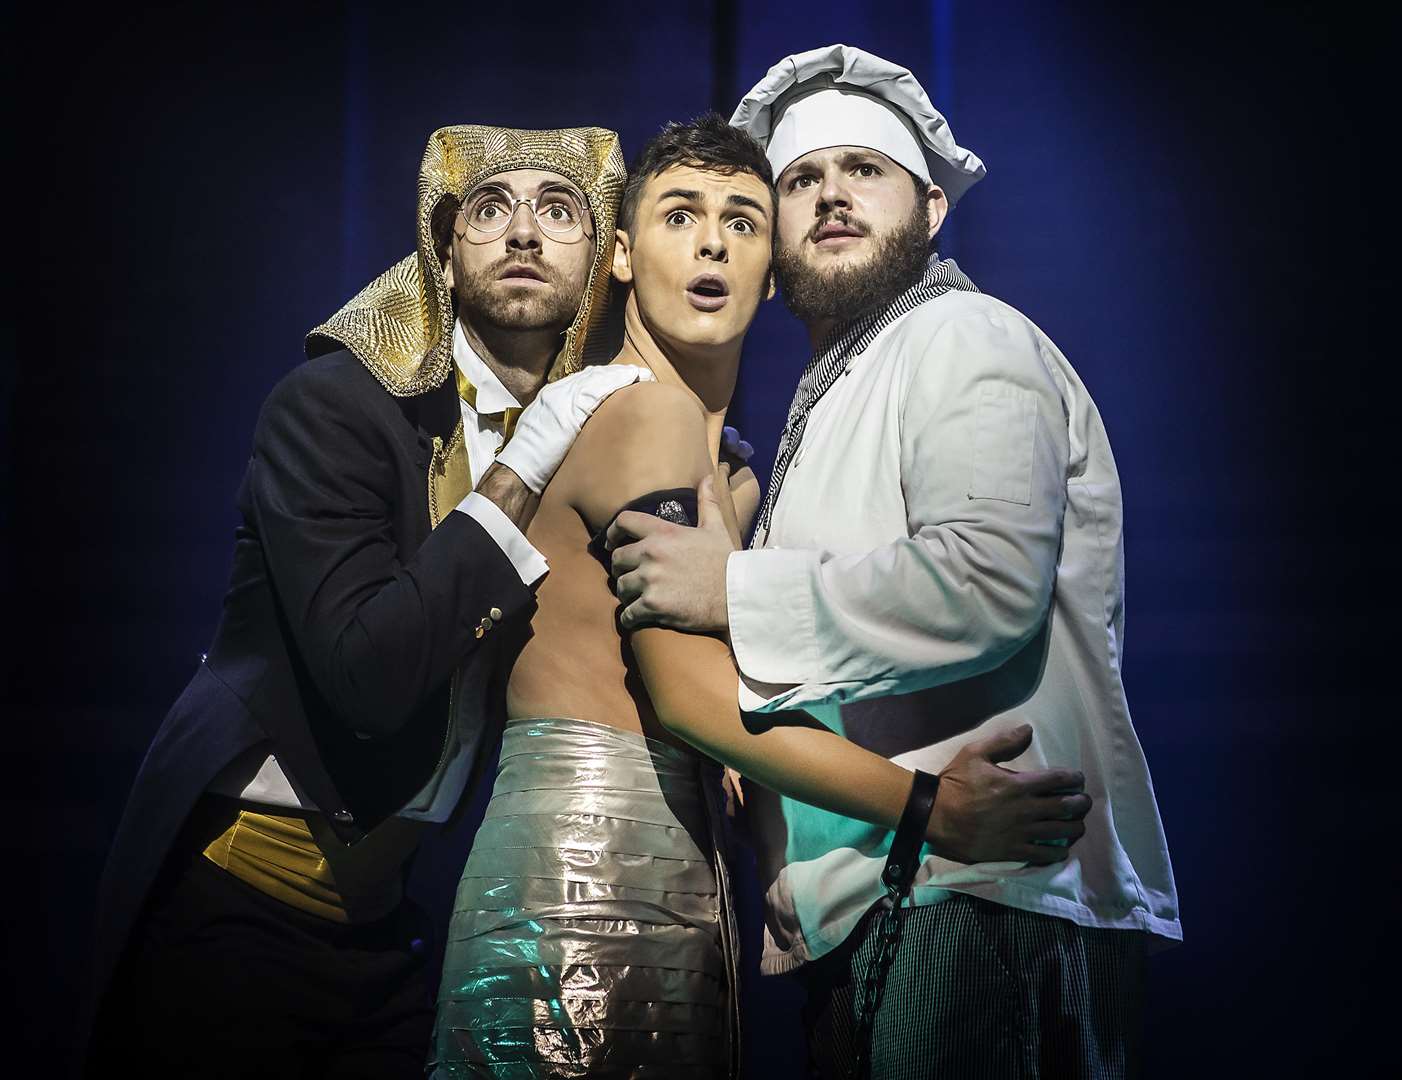 The new production stars the Union J popstar in the title role (7620696)